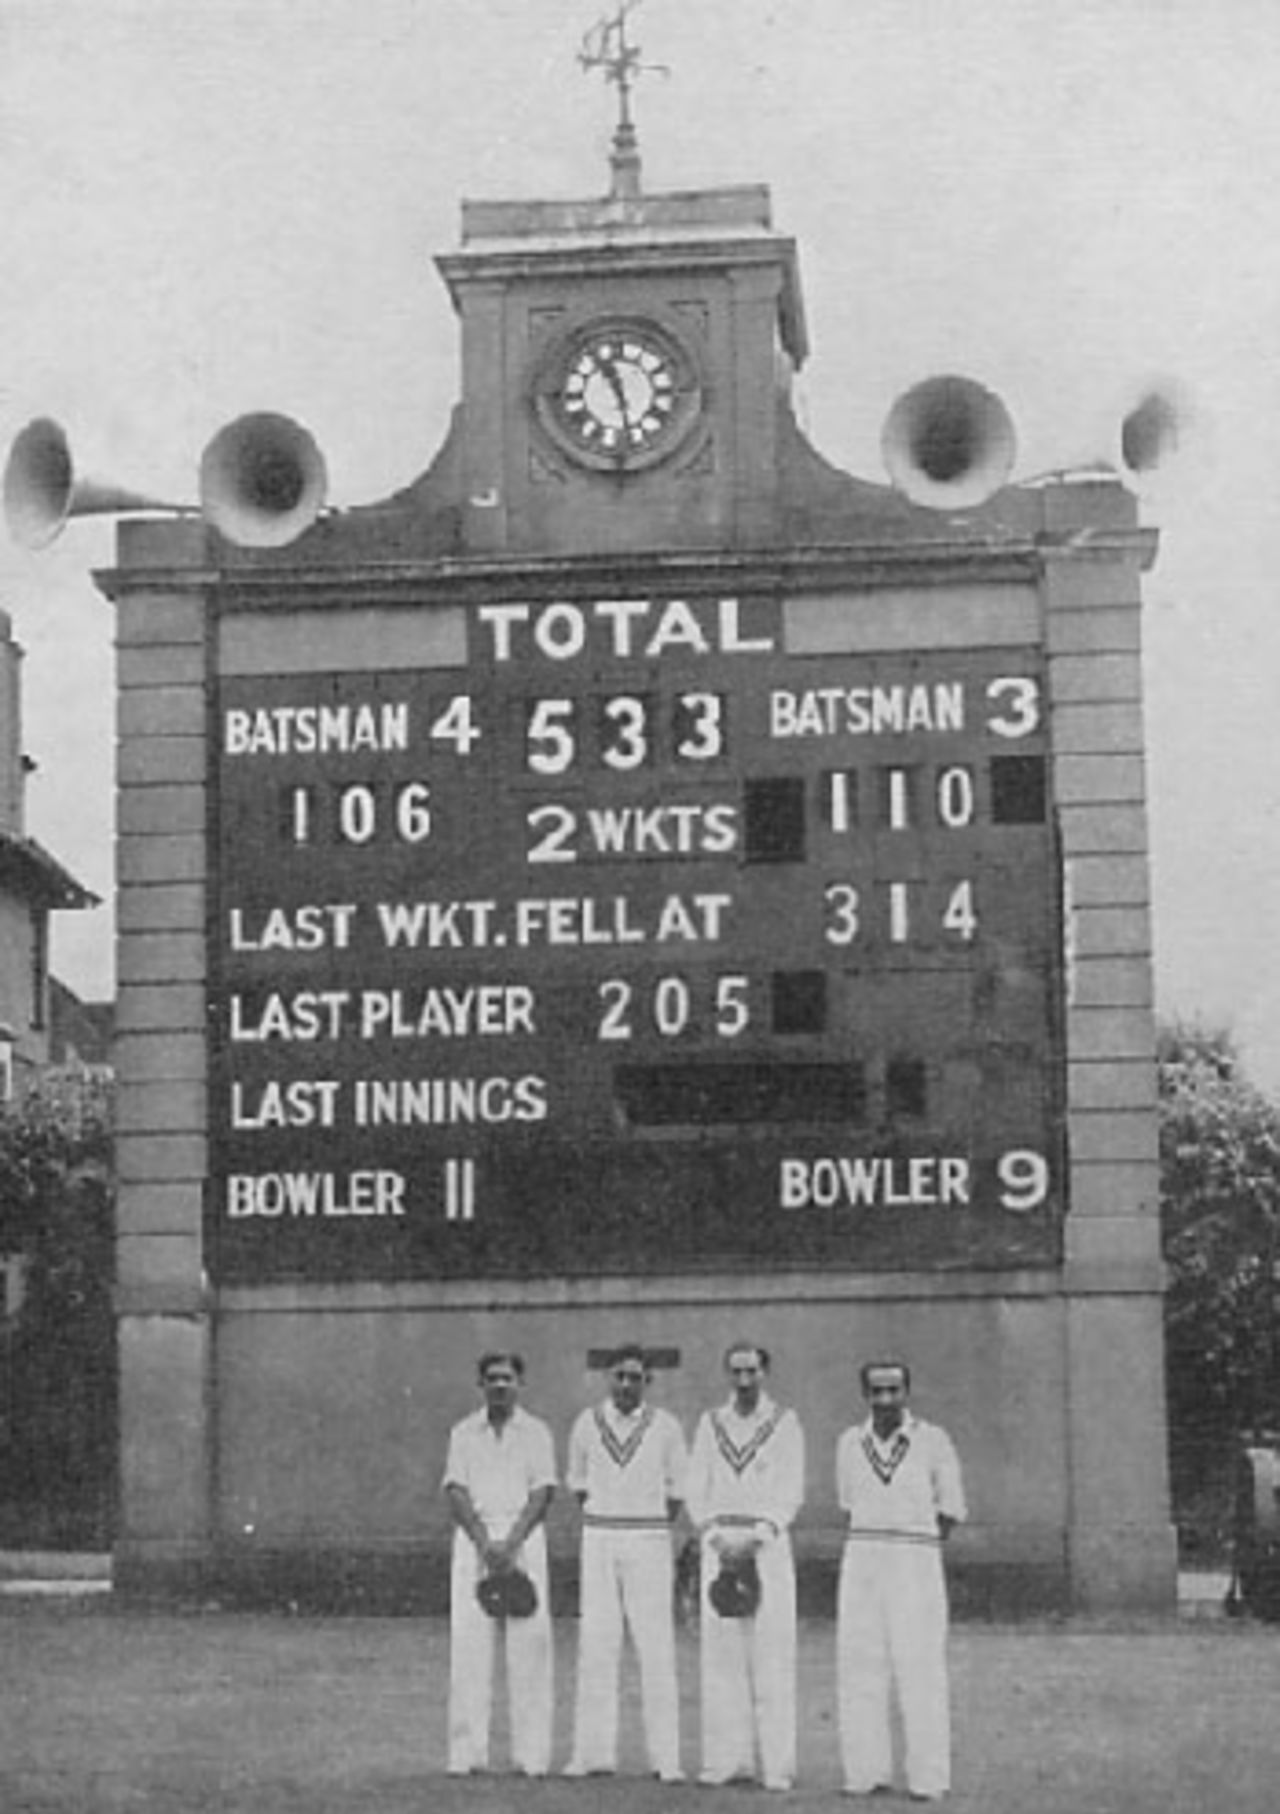 Against Sussex at Hove on July 29, 1946 the first four batsmen of the Indian team completed centuries. The board shows the position just before the fall of the third wicket. The players from left to right are: V. Mankad who scored 105, L. Amarnath (106), Nawab of Pataudi (110 not out), V. M. Merchant (205). The score-board was presented to Sussex by the most famous of all Indian cricketers, K. S. Ranjitsinhji